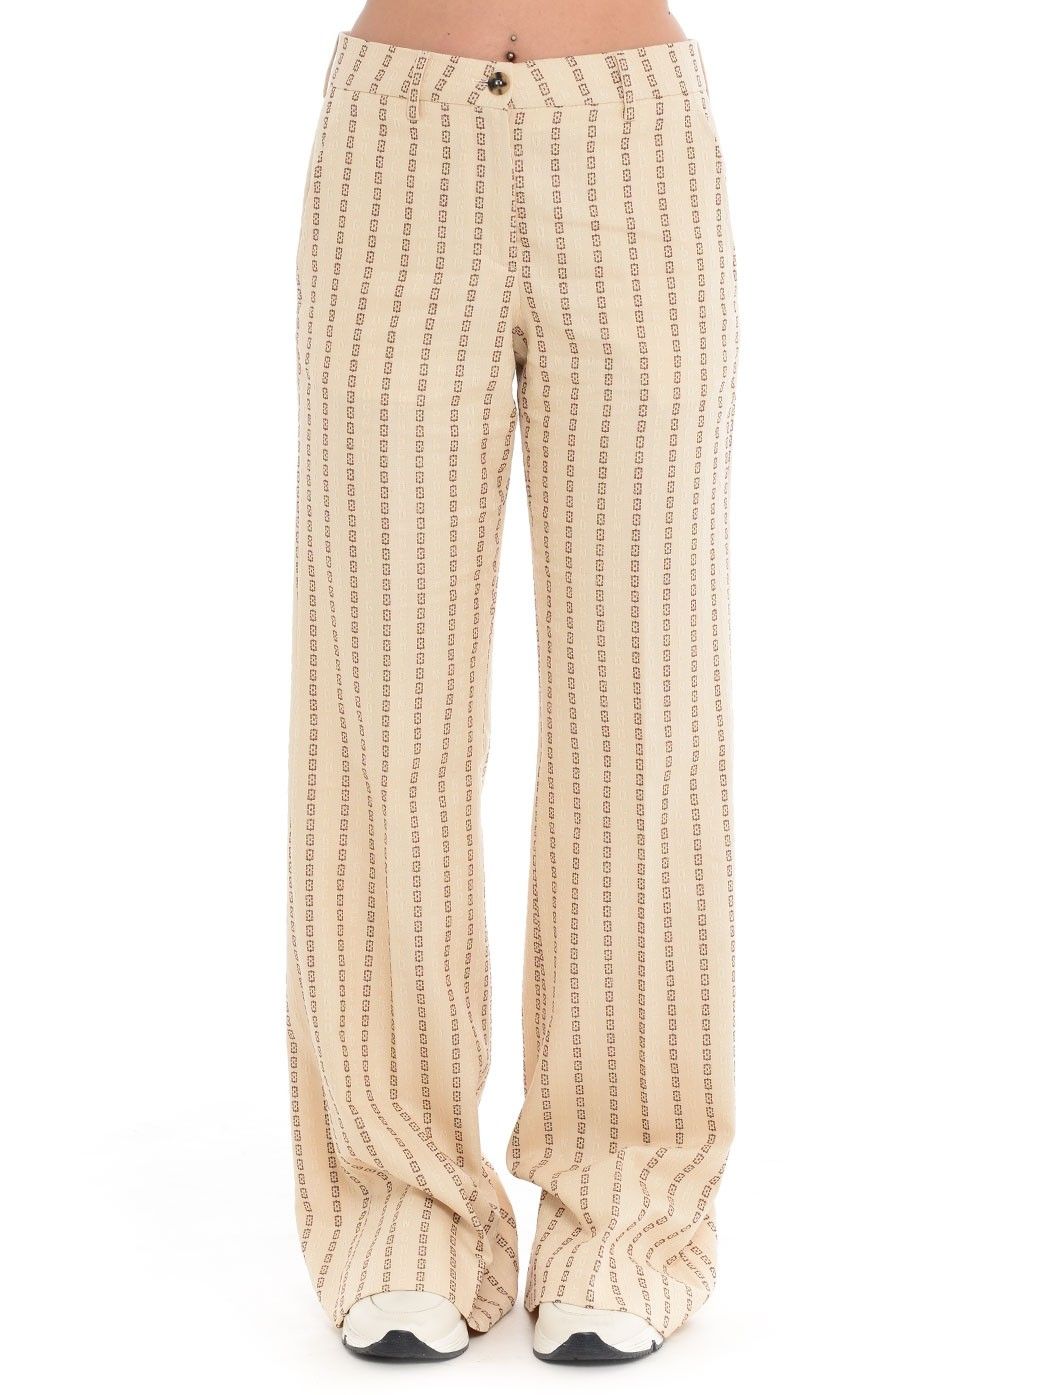  WOMAN TROUSERS,PALAZZO TROUSERS,SKINNY TROUSERS,MARNI TROUSERS,FORTE FORTE TROUSERS,8PM TROUSERS,MSGM TROUSERS,CROP PANTS  GOLDEN GOOSE GWP01327